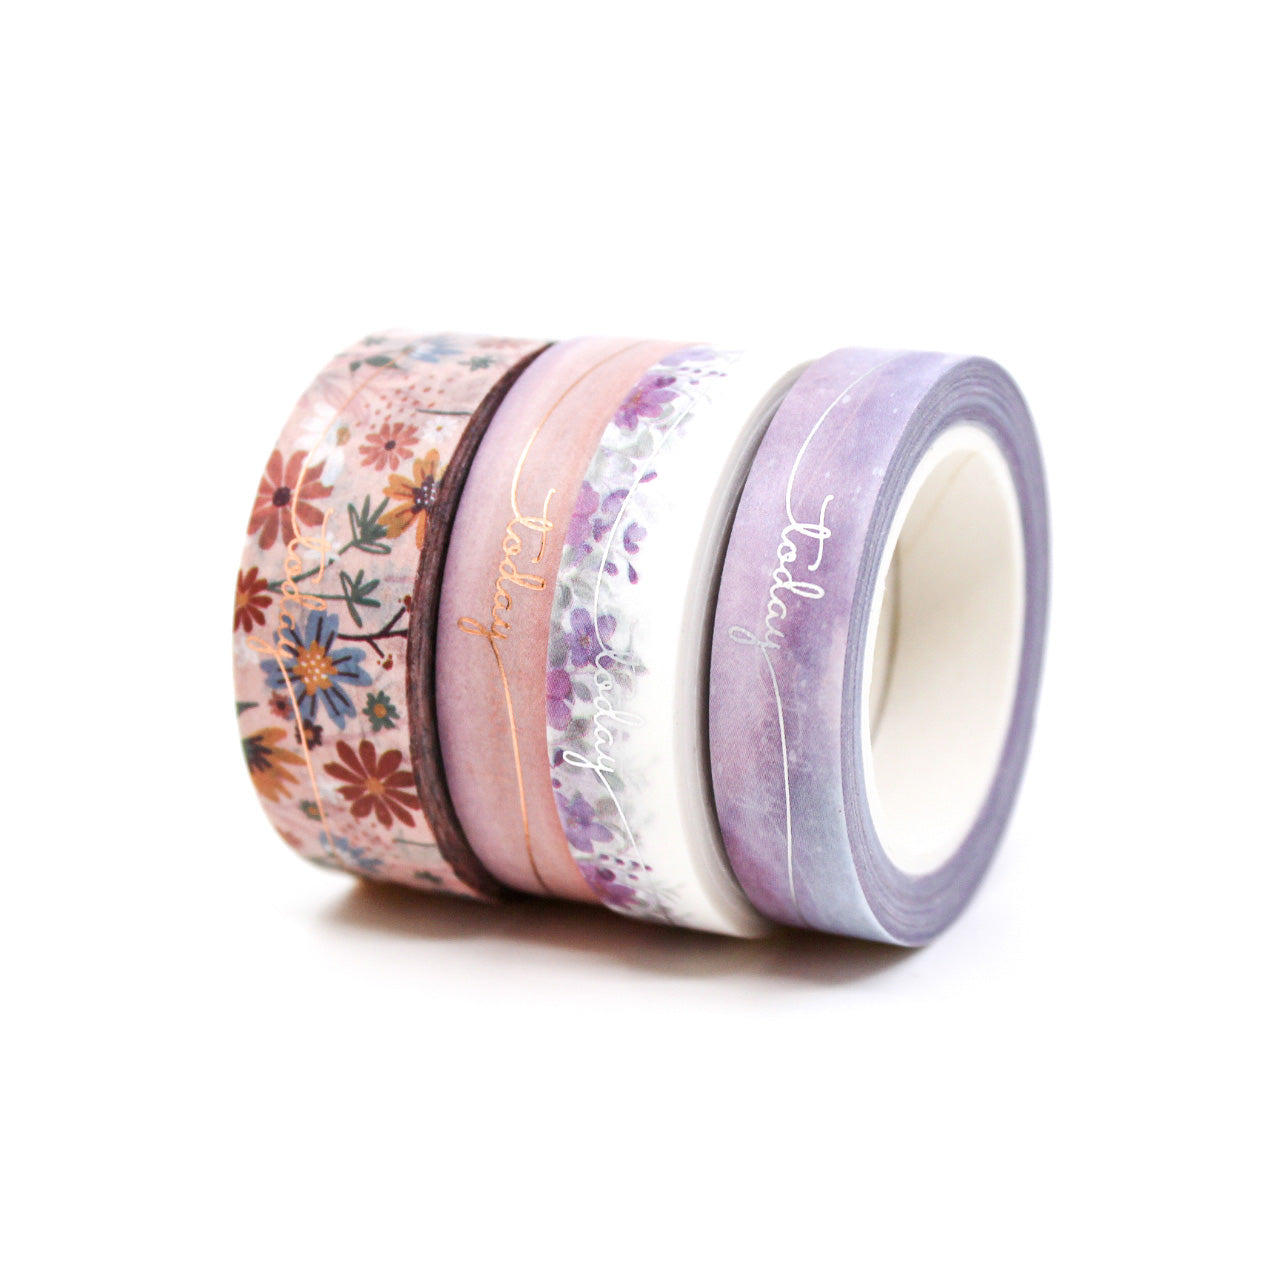 This elegant washi tape features a foil "Today" text design, adding a touch of sophistication to your planner or journal. Ideal for marking important dates or events, this tape is perfect for adding a stylish flair to your organization. This tape is sold at BBB Supplies Craft Shop.